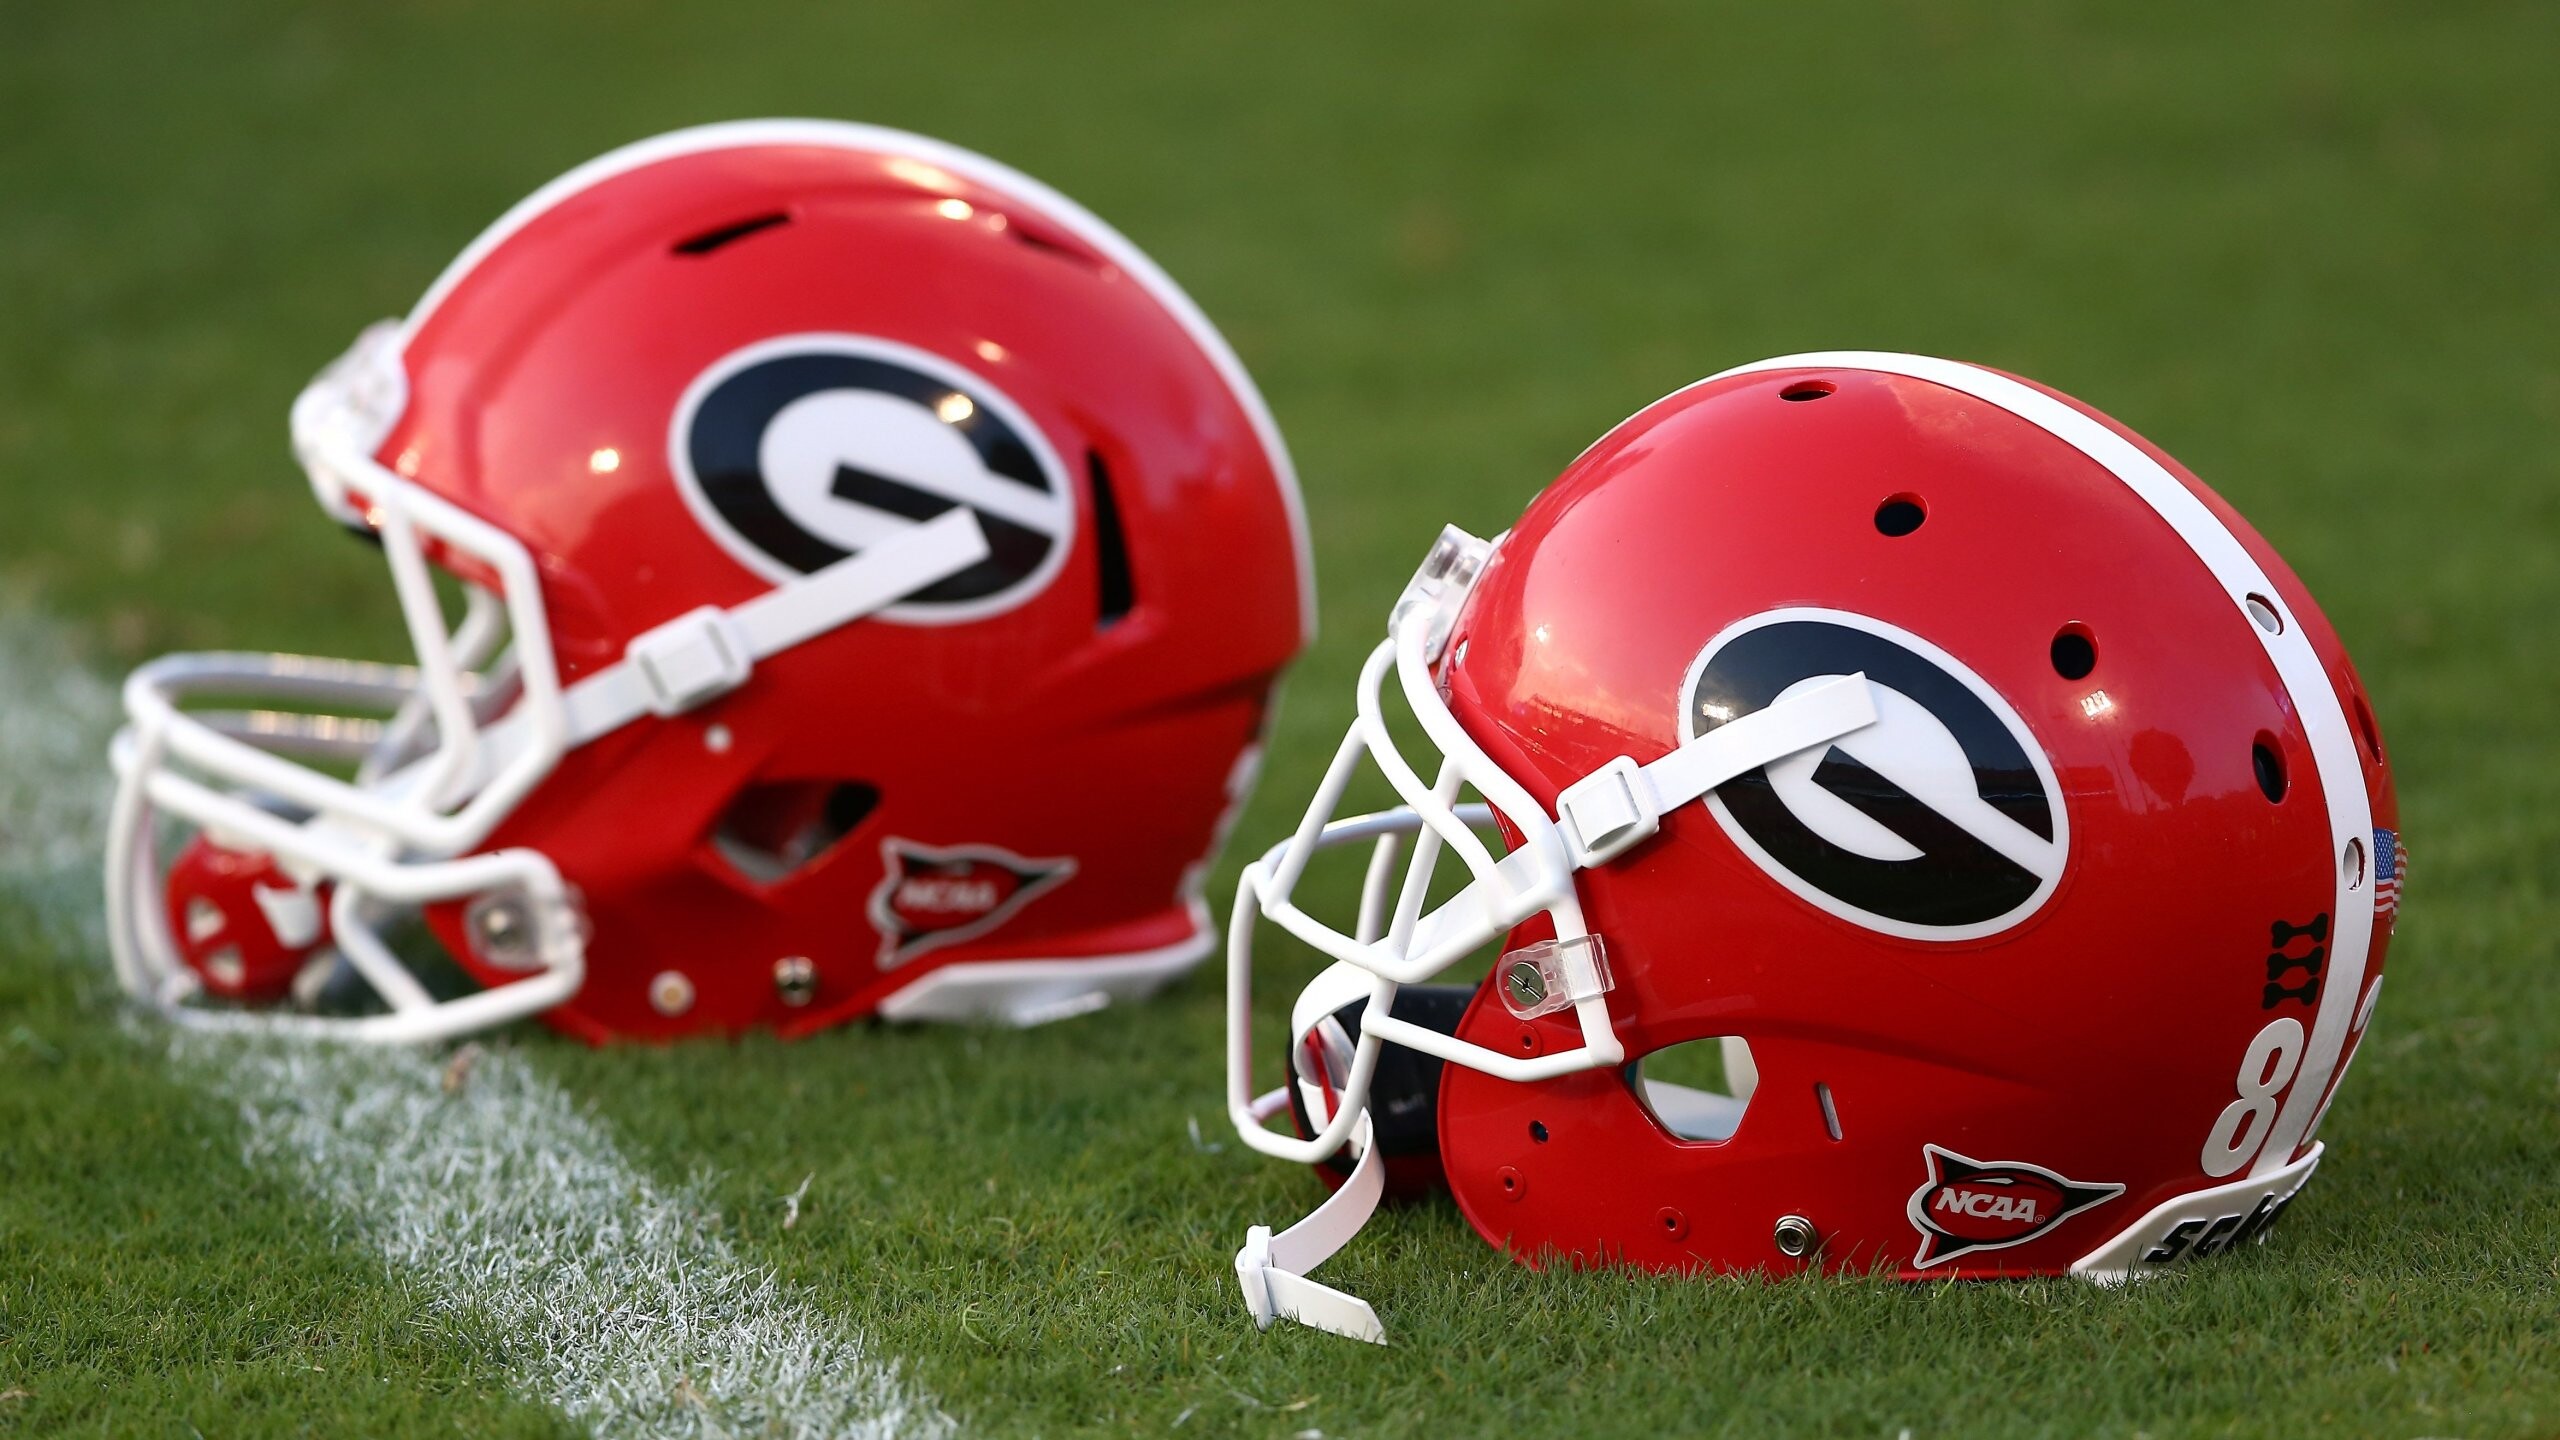 Georgia Bulldogs: Red, UGA football, Helmets, NCAA, The only undefeated team in 1980. 2560x1440 HD Wallpaper.